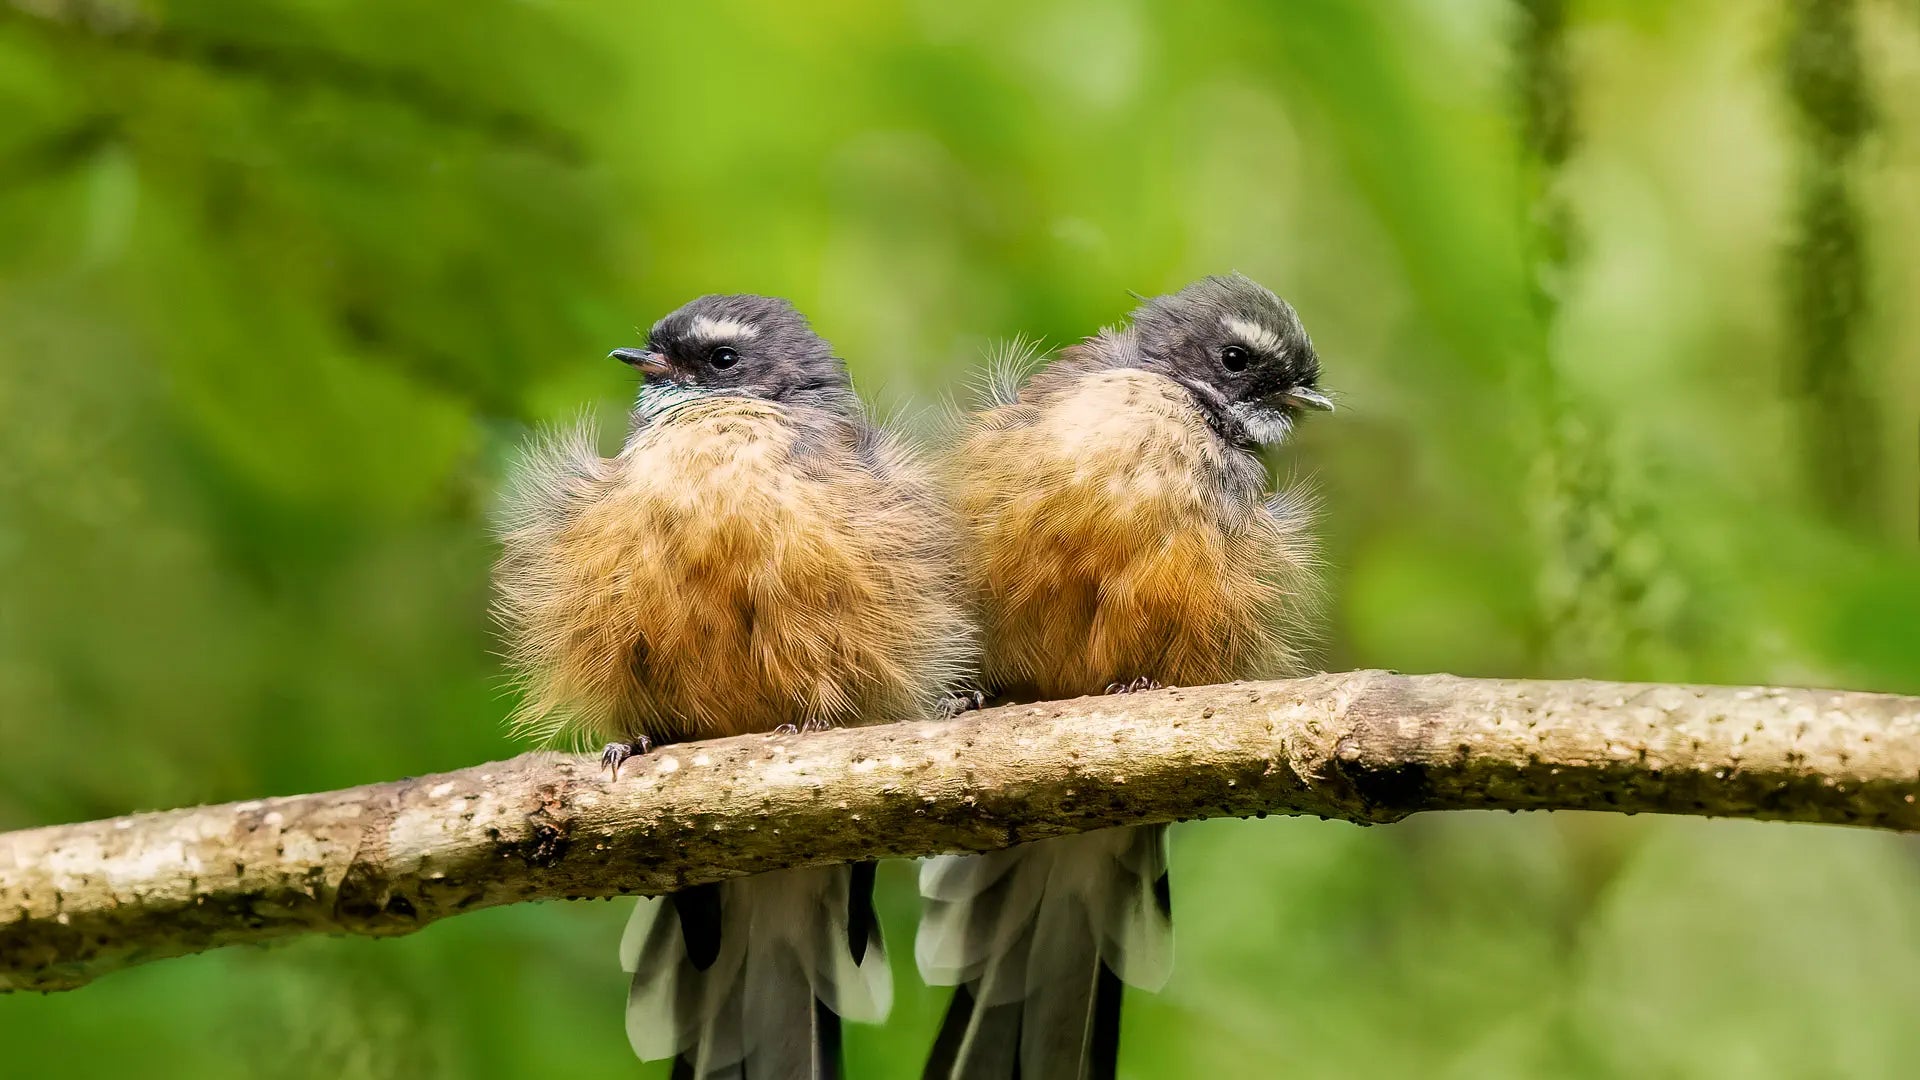 Two cute fantails on a branch